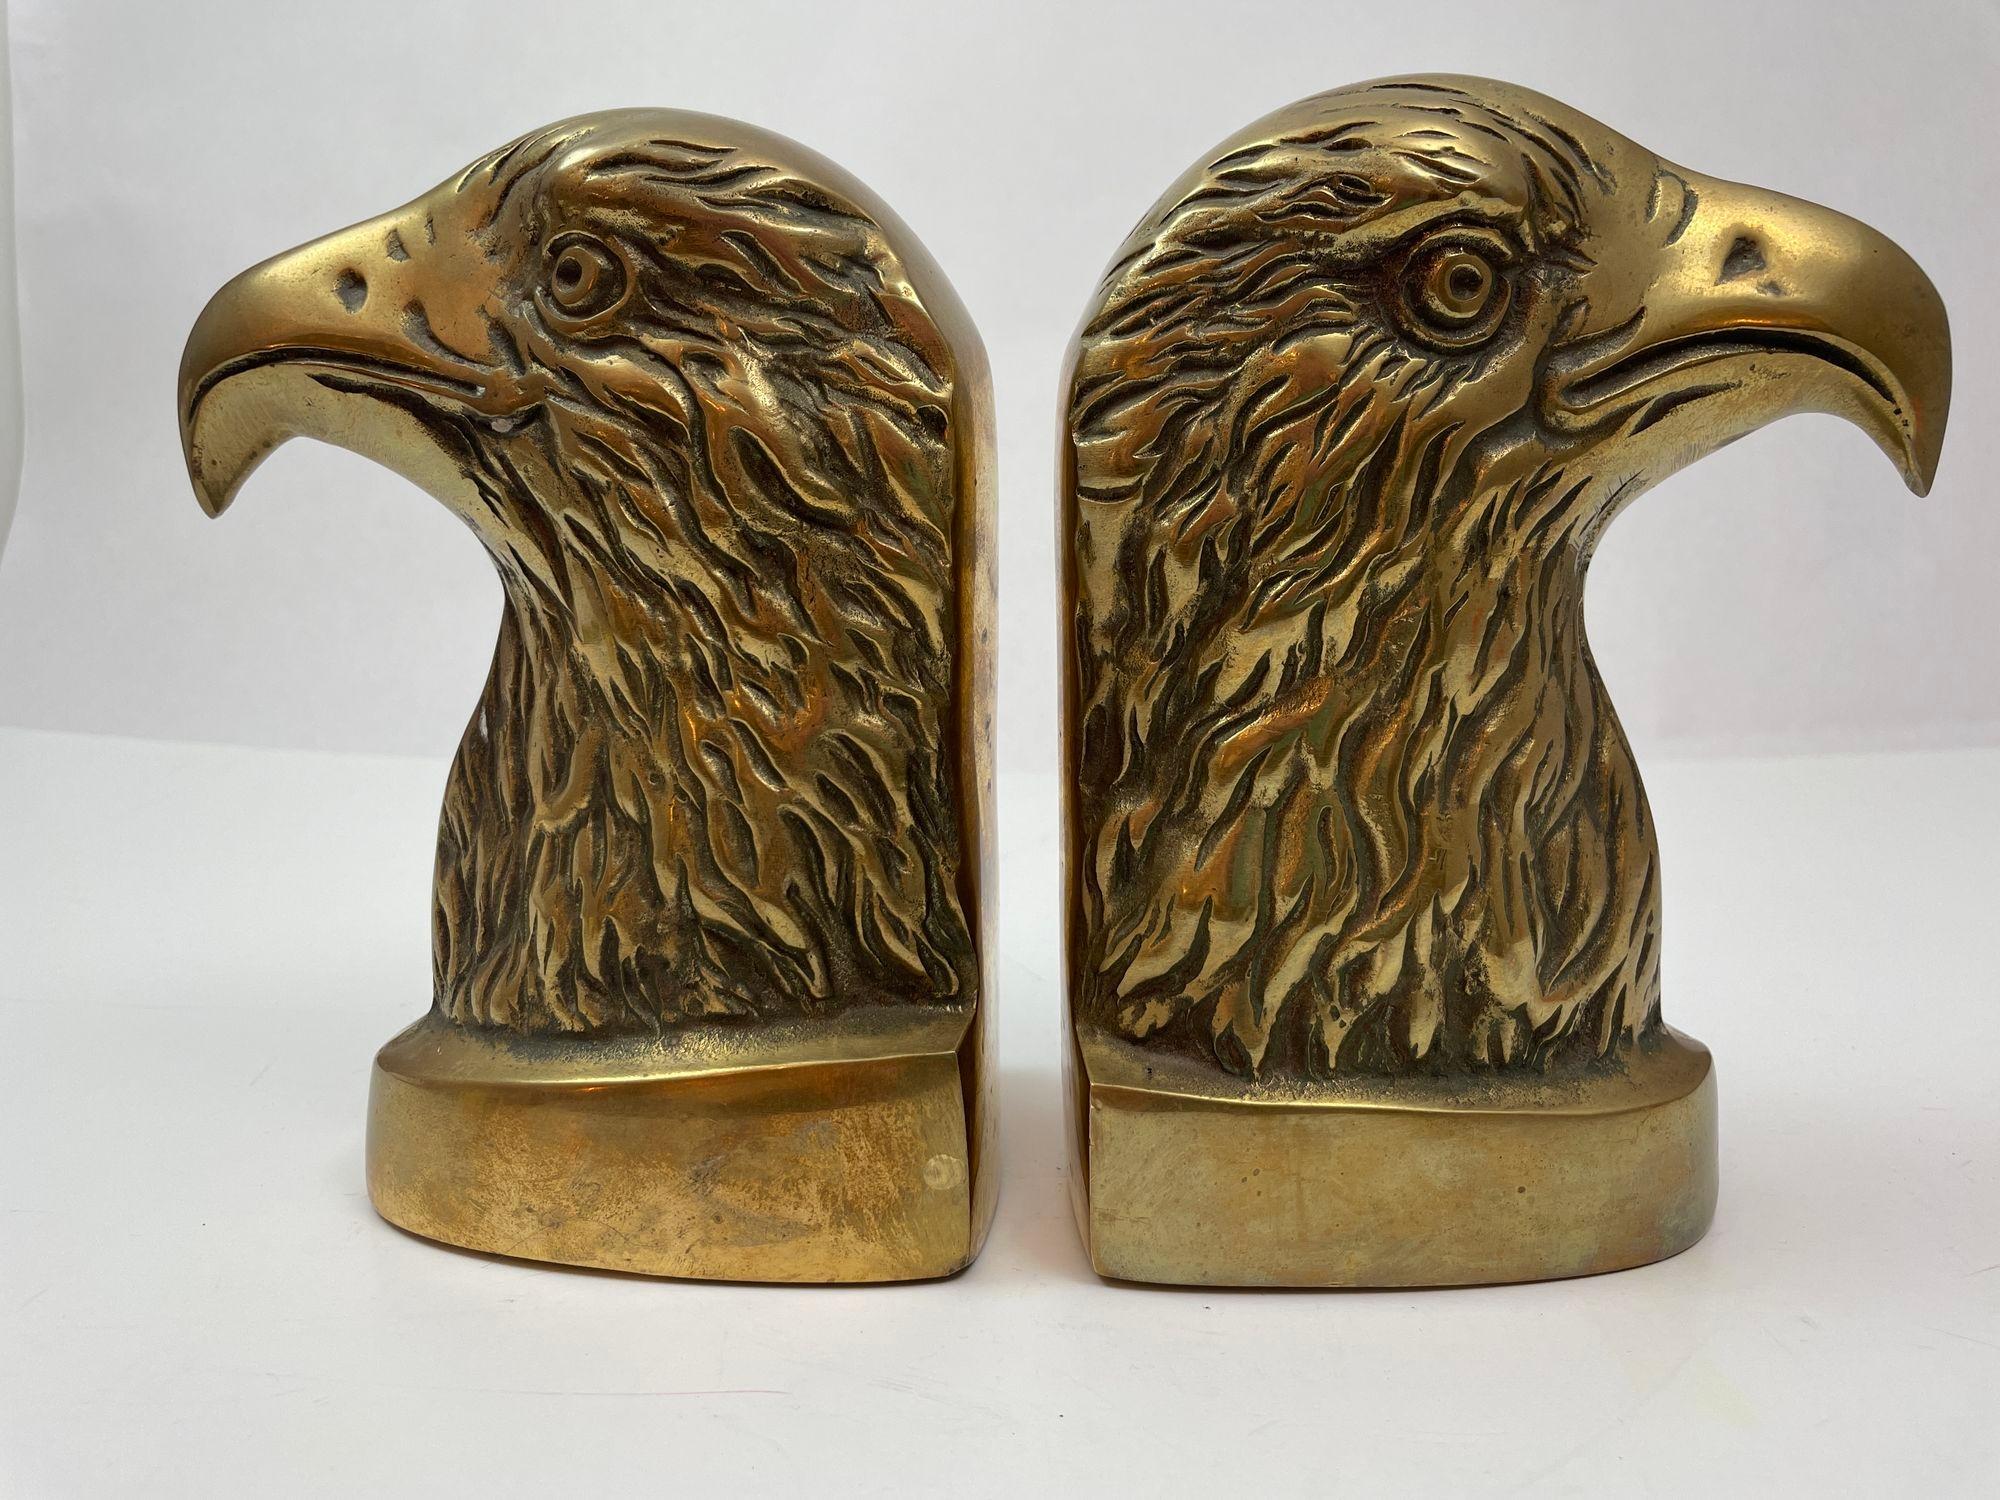 Vintage American Bald Eagle Brass Bookends a Pair
Beautiful detail on this 1950s pair of American Bald eagle head bookends.
Nice set of large brass American Bald Eagle bookends.
This is for a matching pair of brass eagle heads that have a wonderful